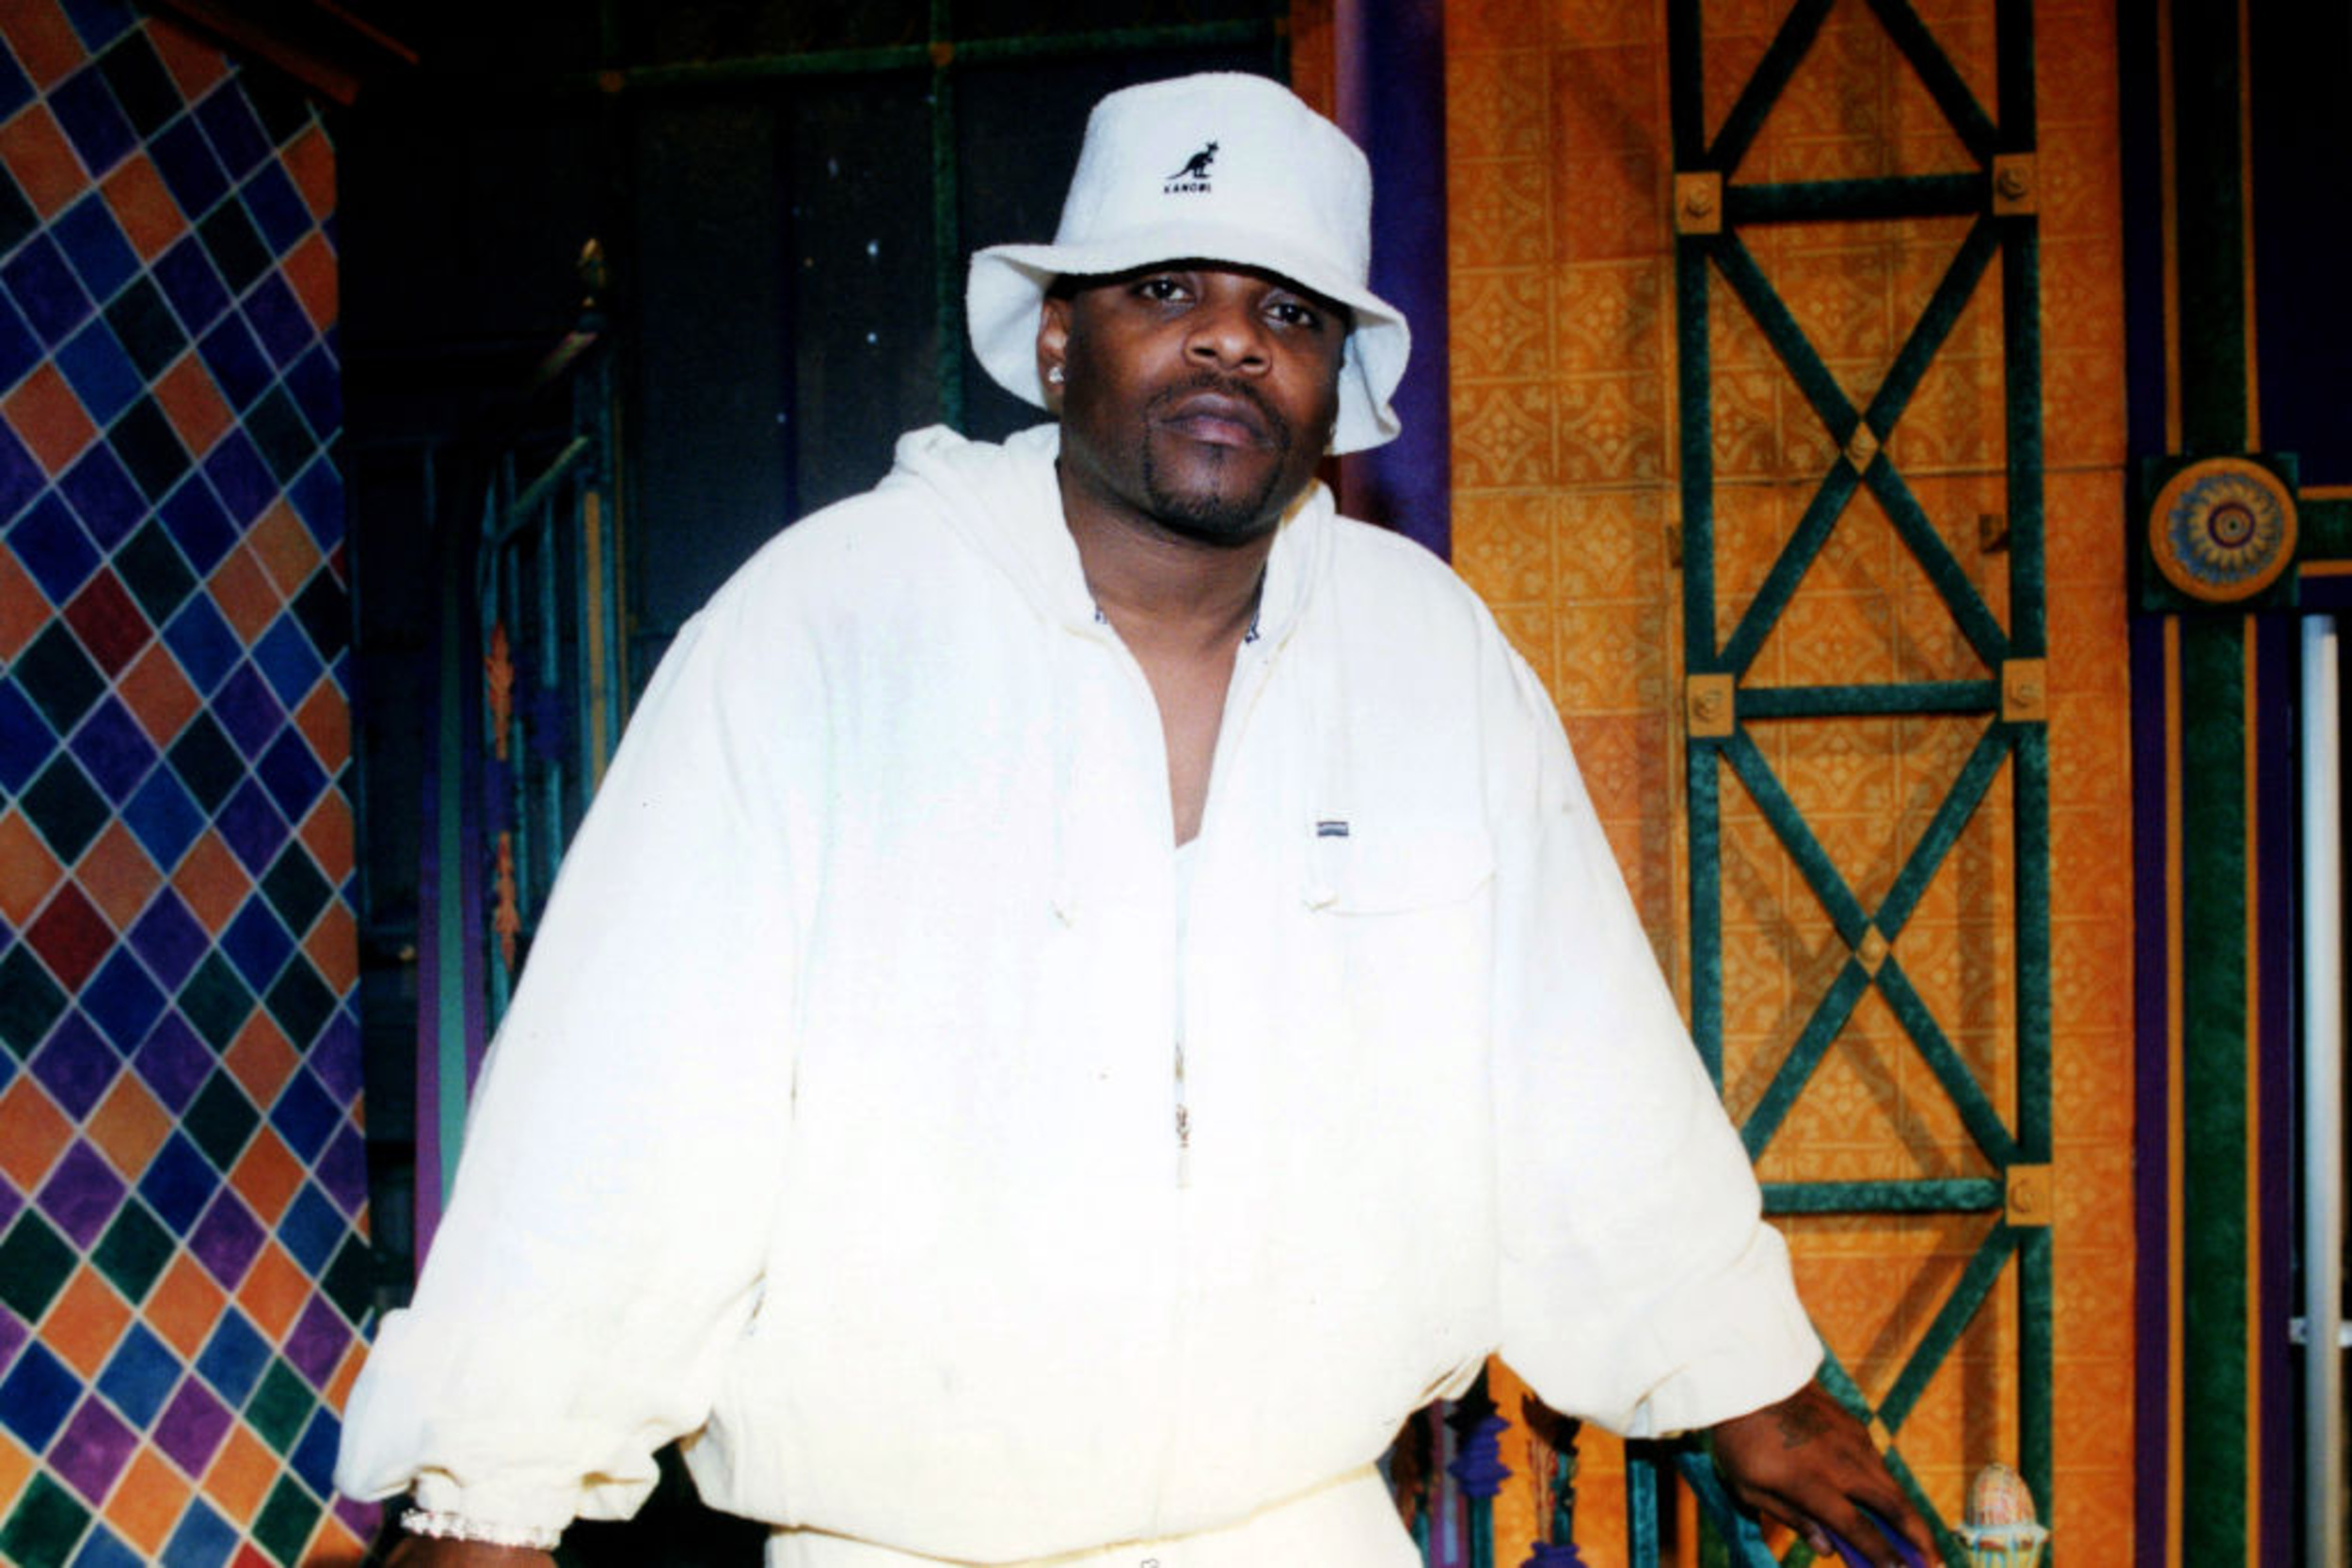 <p>In 1999, Case released his sophomore album<em> Personal Conversation</em> to rave reviews. On the album’s second single “Happily Ever After,” Case eloquently proposes to his partner. He details how he wants to be the man and protector, and hopes to live happily ever after with his future wife. In the music video, Case’s love interest was played by Beyoncé.</p><p>You may also like: <a href='https://www.yardbarker.com/entertainment/articles/the_20_coolest_talking_cars_in_movies_tv_shows_and_games_111623/s1__39511984'>The 20 coolest talking cars in movies, TV shows and games</a></p>